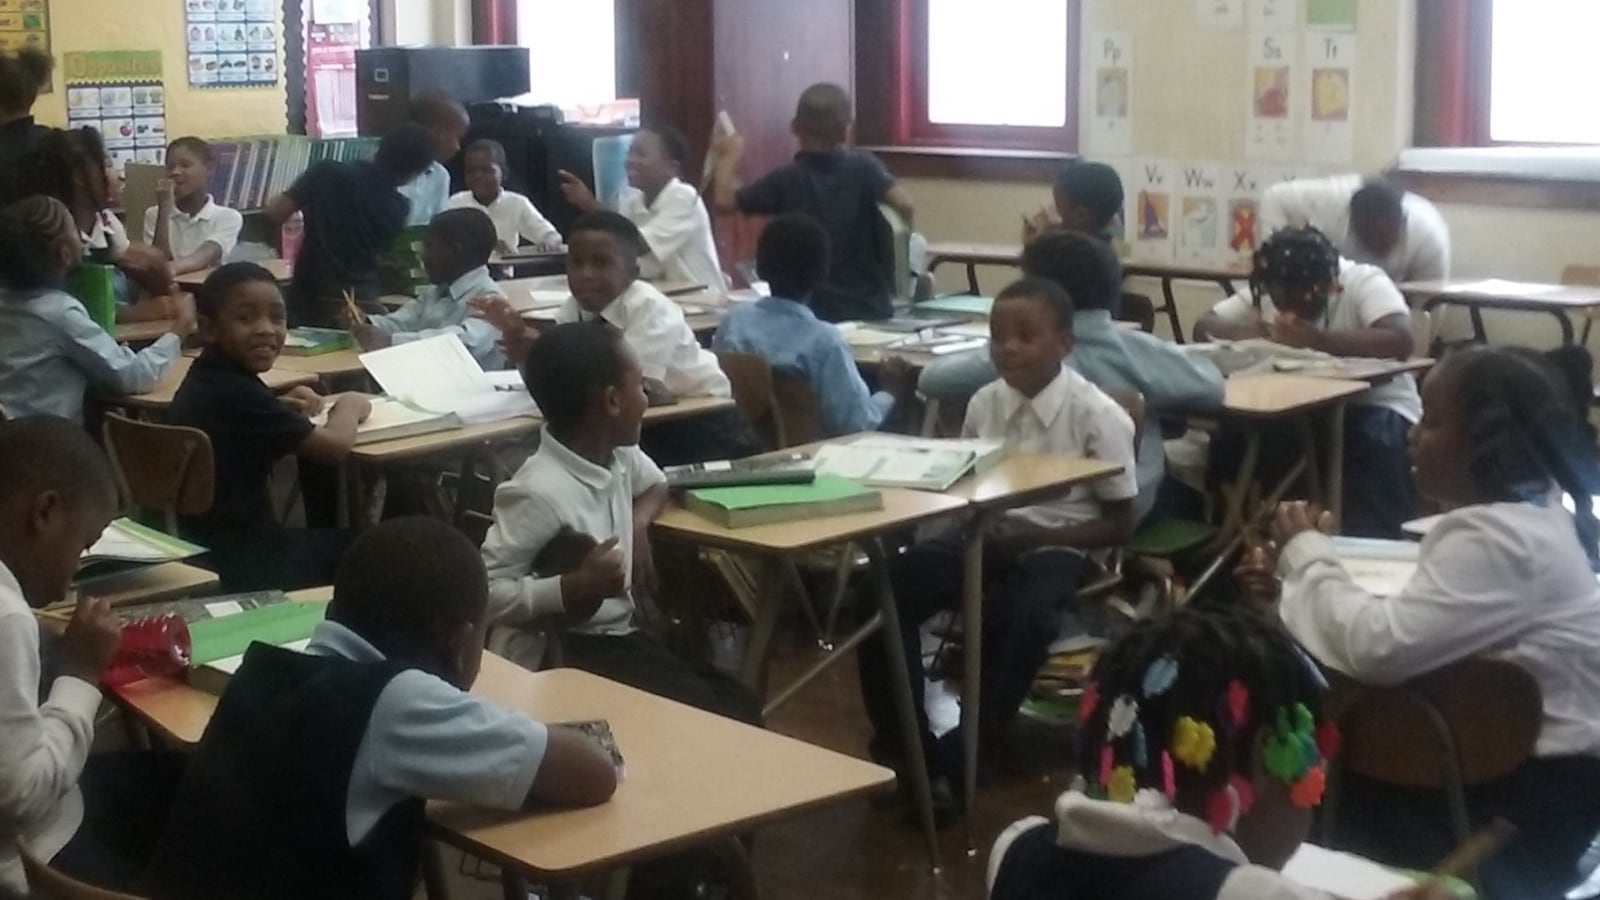 Parents at Detroit's Paul Robeson Malcolm X Academy say a teacher shortage is to blame for the 42 kids in a second-grade class.